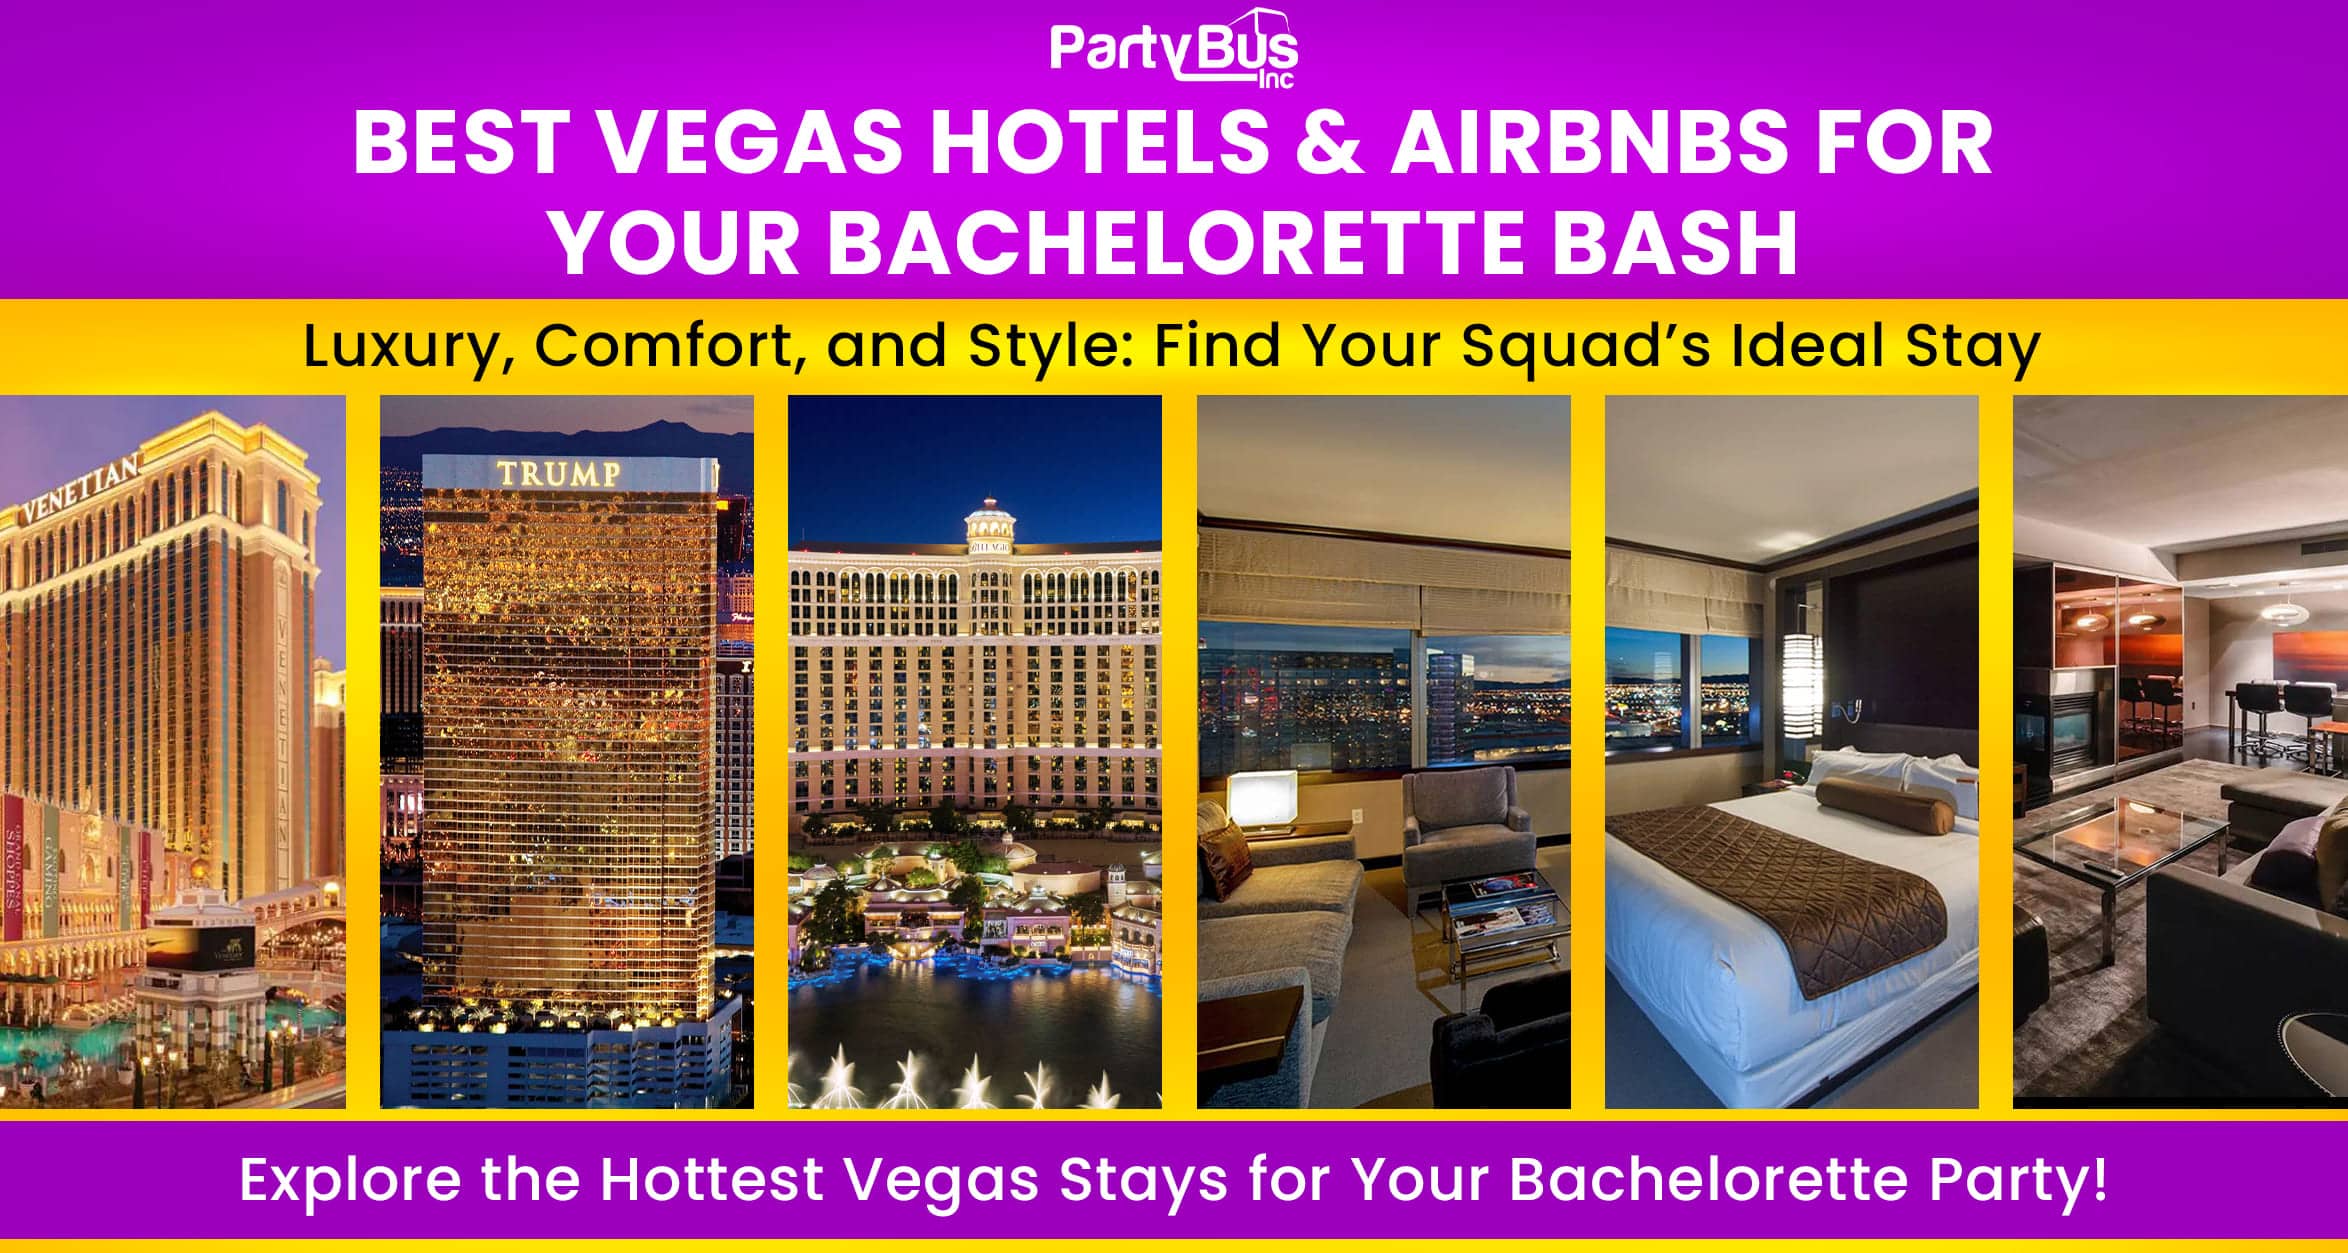 Showcasing top Vegas hotels and Airbnbs for bachelorette parties with images of luxurious rooms and amenities. 